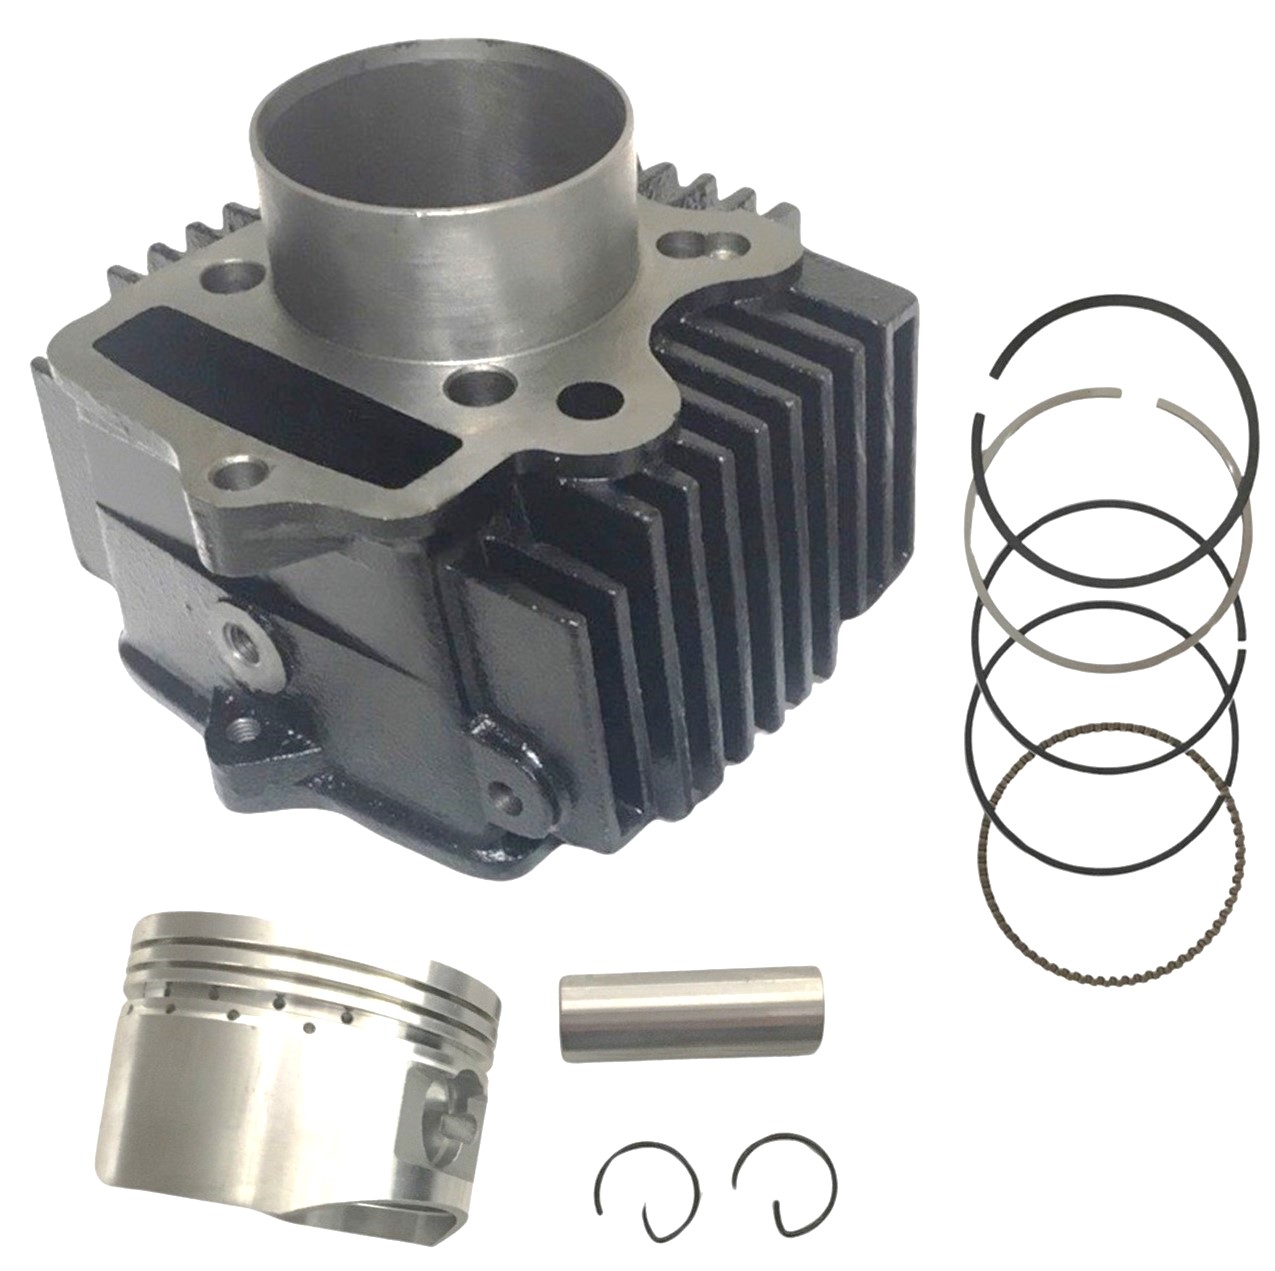 Cylinder Piston Top End Kit 70cc 4 Stroke Chinese ATVs, Dirtbikes B=47mm, H=62mm